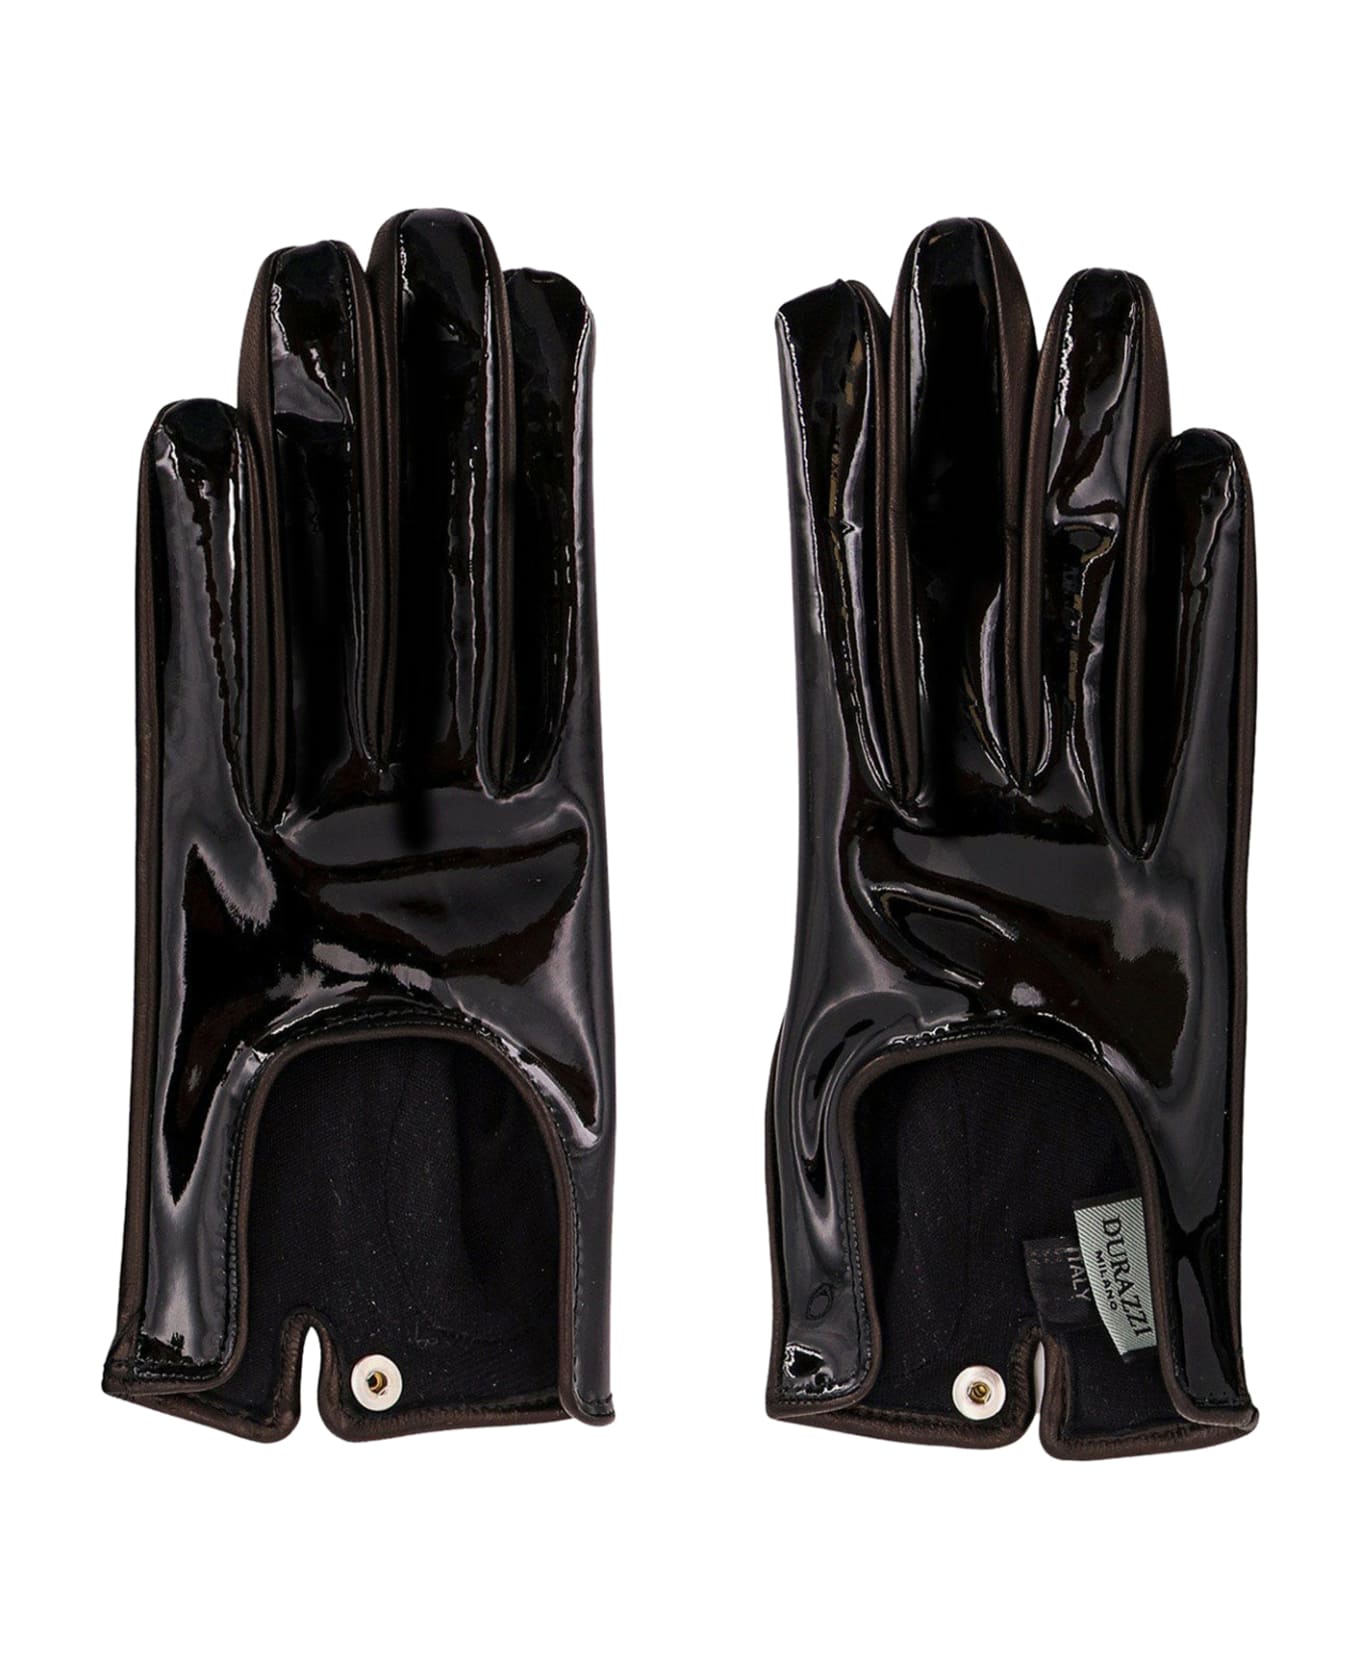 Durazzi Milano Patent And Calfskin Leather Gloves. Silk Lining - Black